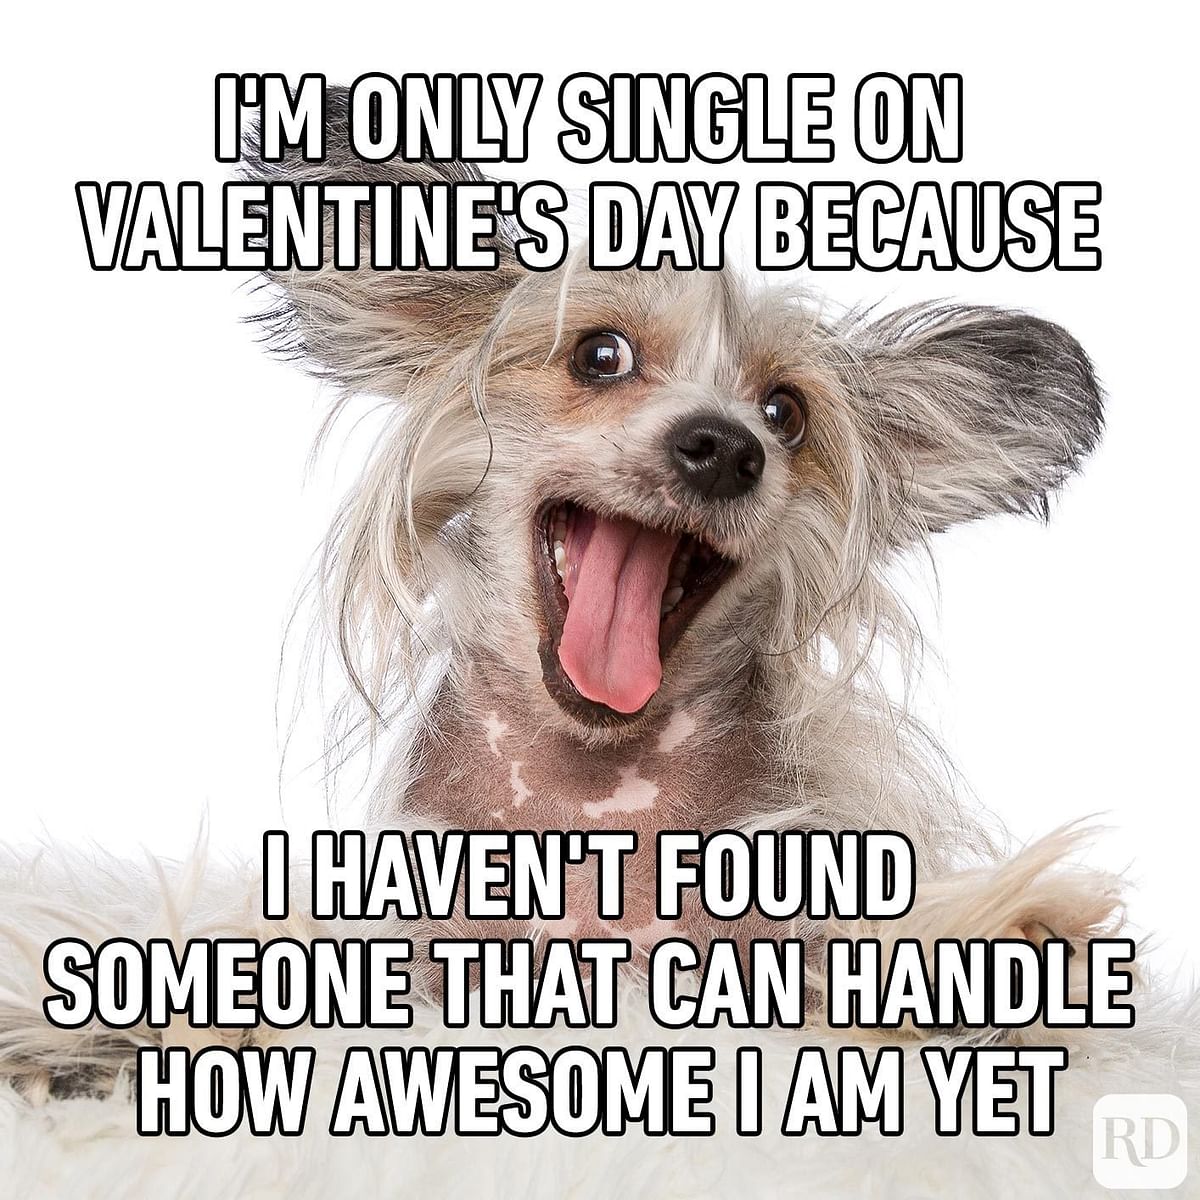 Valentine s Day 2022 Jokes Funny Memes Images Quotes for Singles